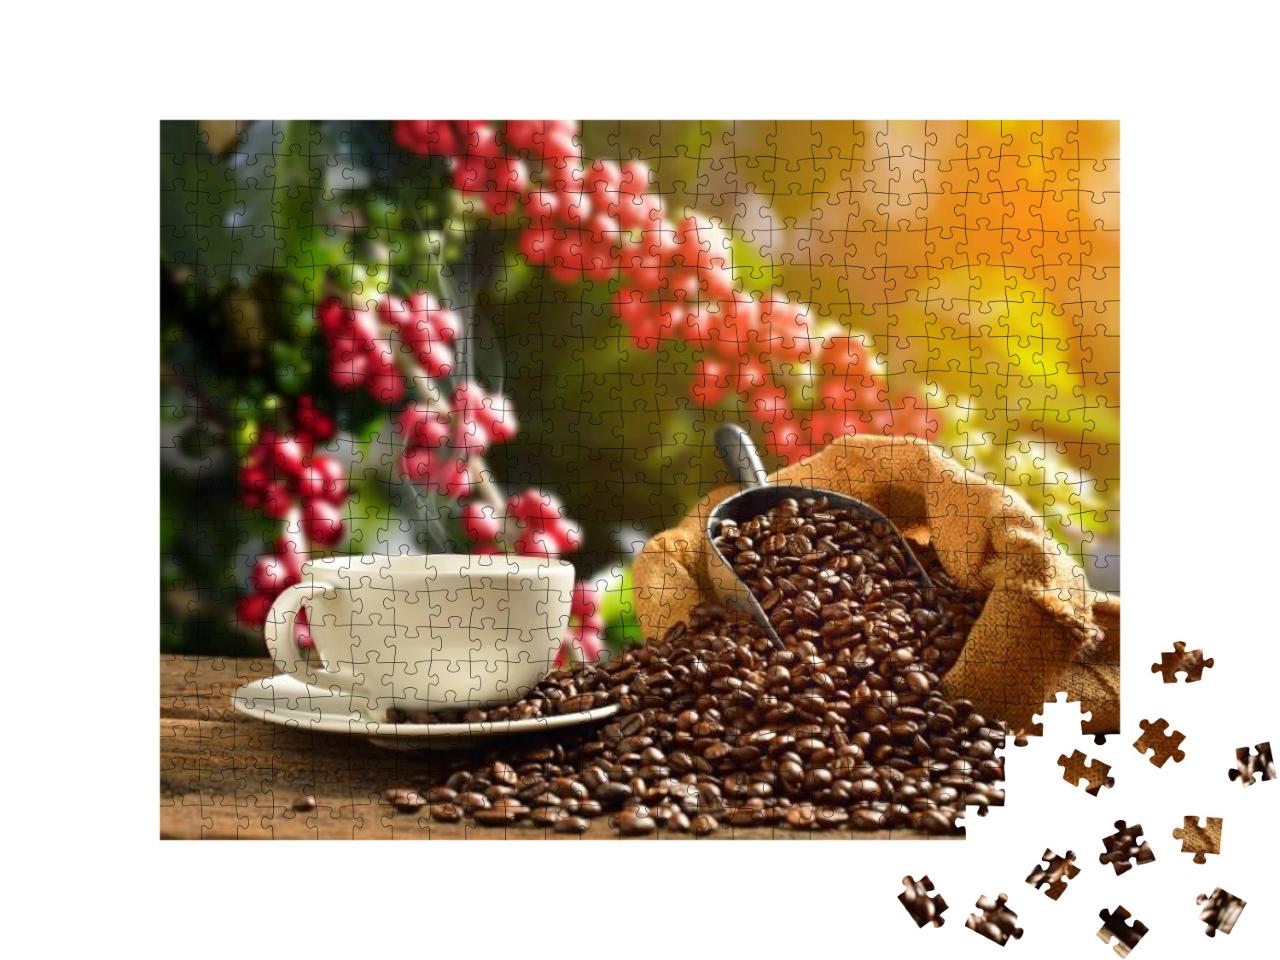 Cup of Coffee with Smoke & Coffee Beans in Burlap Sack on... Jigsaw Puzzle with 500 pieces